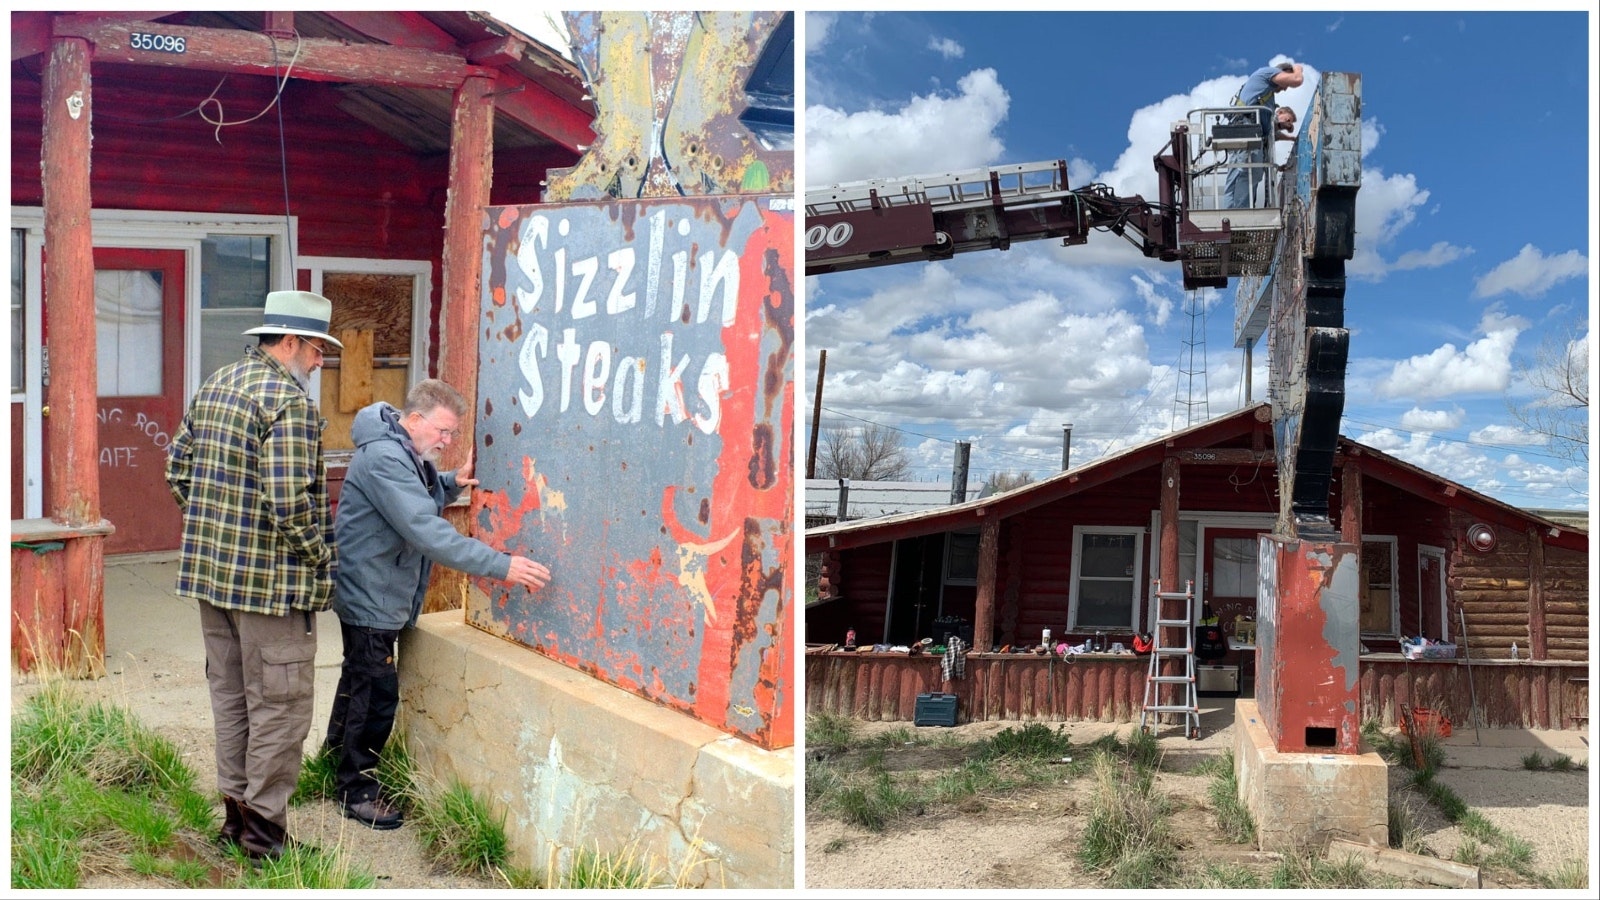 Tumble Inn owner Jonathan Thorne, right, and artist Samuel Austin discuss how they're going to restore the iconic Tumble Inn neon roadside sign in Powder River, Wyoming. At right, the work is underway.